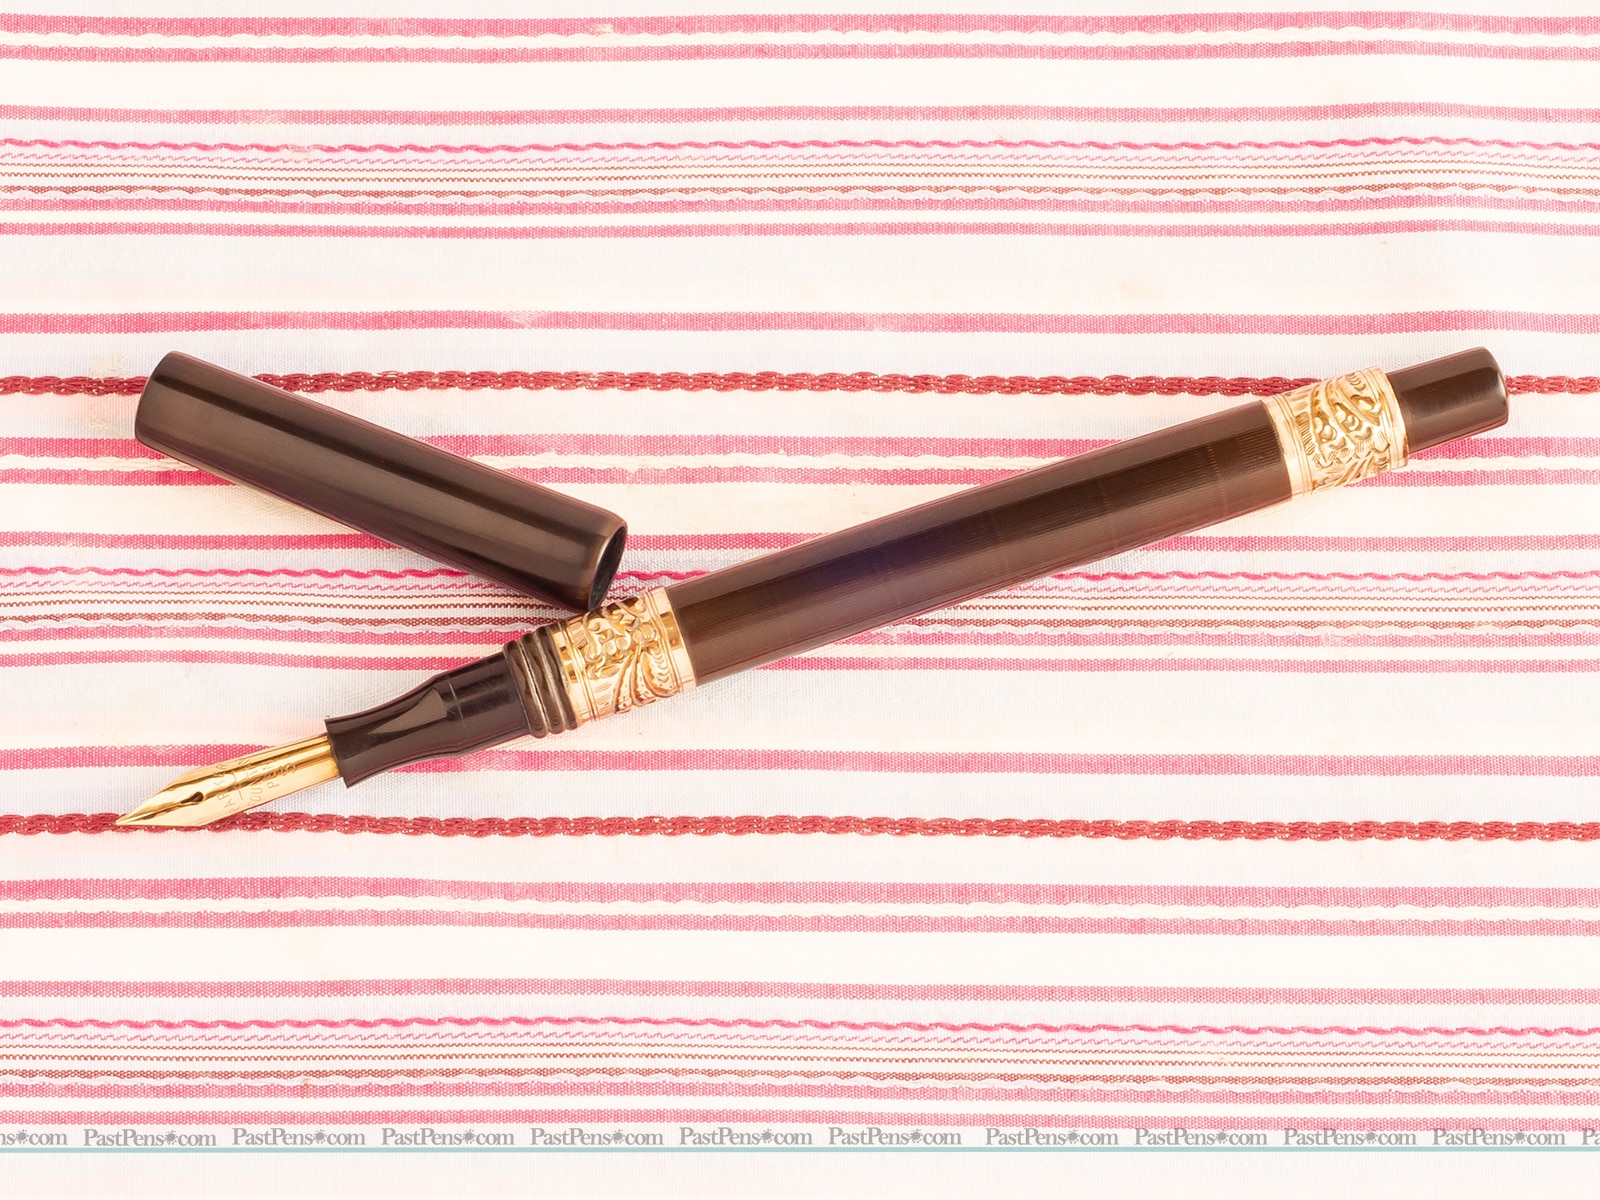 parker lucky curve 9 gentlemen size ornamented gold band black fountain pen pk268 repaired